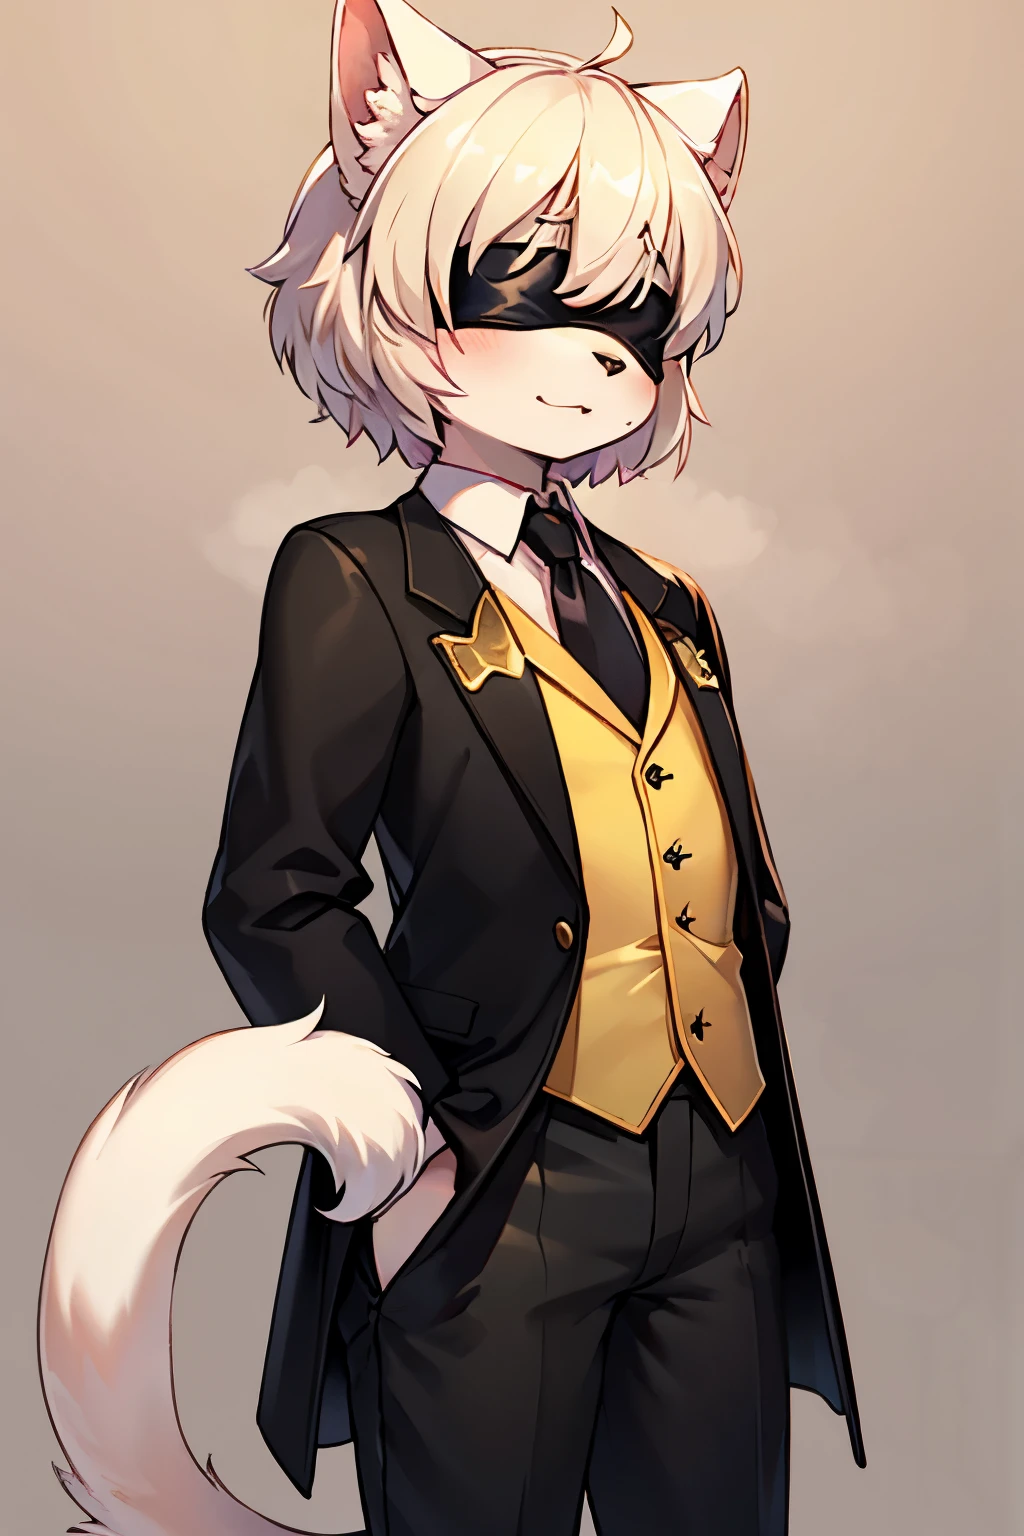 solo, 1girl, no eyes, short white fluffy hair kept up by a black blindfold, white rikkor ears, black blindfold covering eyes and forehead, dark purple tuxedo coat with golden patterns on the left side of it, white cat tail, detailed clothing, rich color palette with deep purples and golden hues, shining golden patterns on the left side of the tuxedo coat, black undershirt, black pants